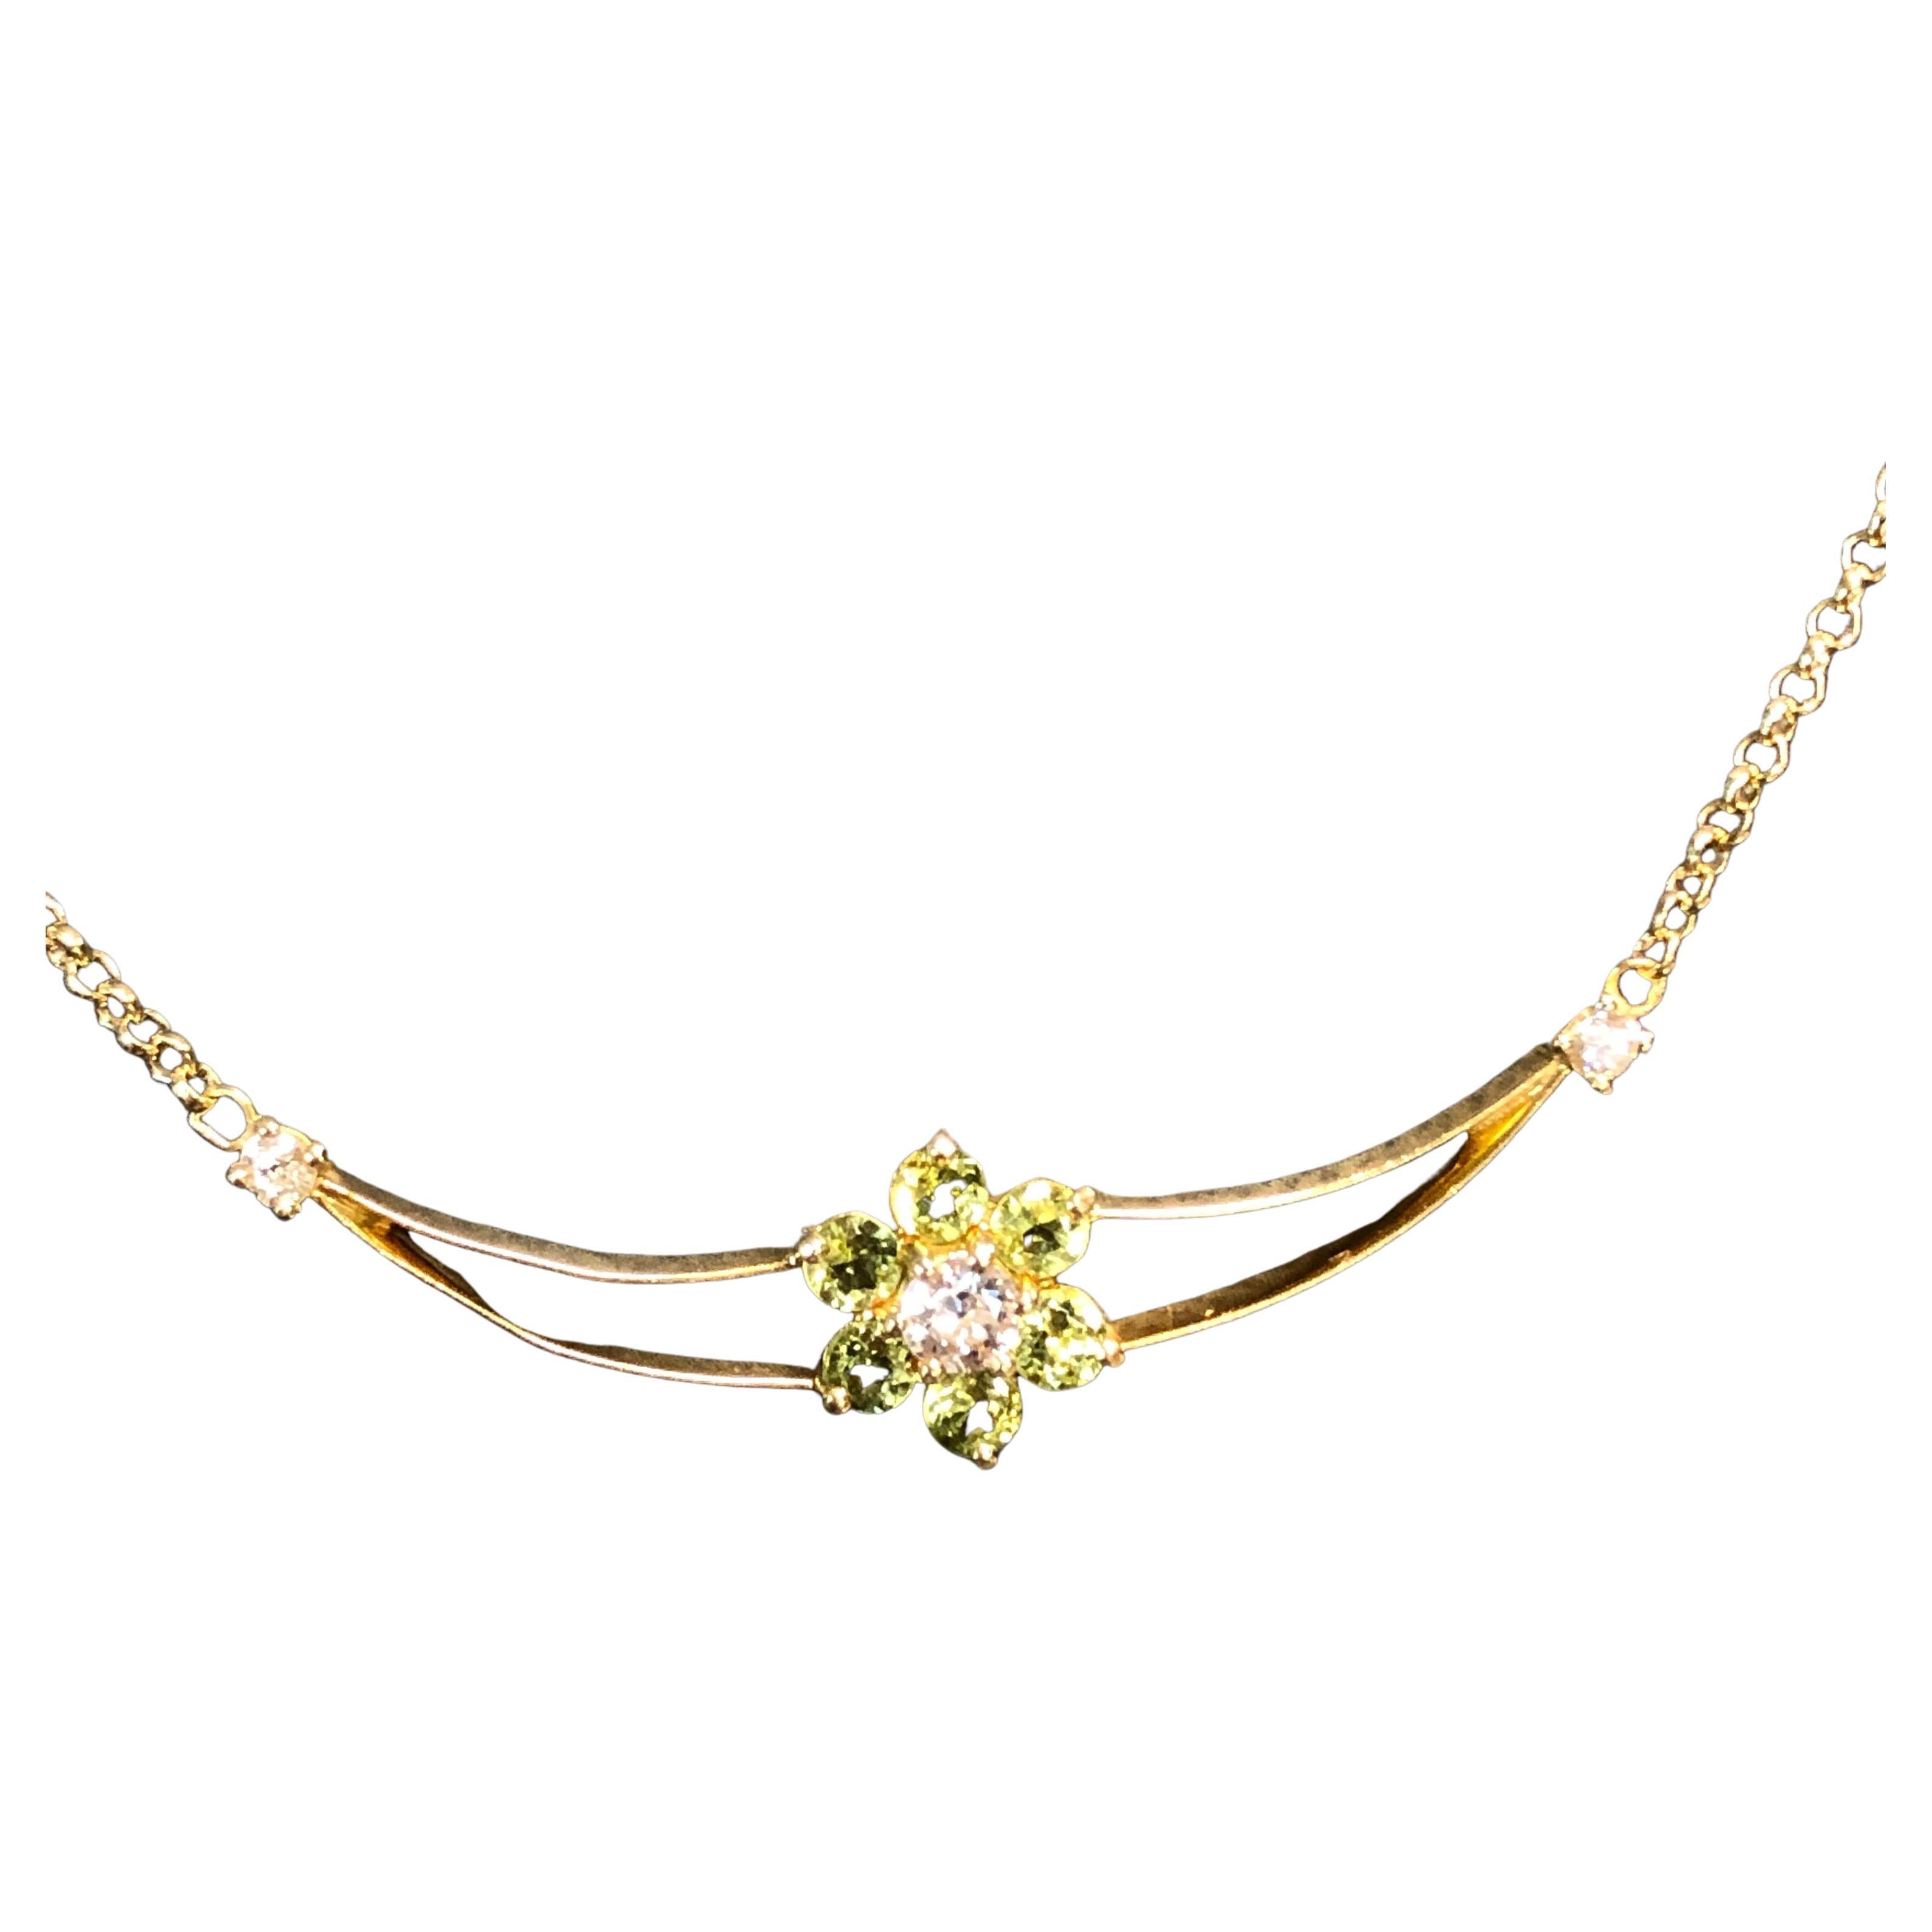 Vintage lavaliere pendant necklace stamped 18 carat gold.
Pendant on a 18 carat gold chain is featuring a flower as a centre piece,
set with six peridots and three diamonds
One centre diamond is measuring 3.7 mm in diameter (estimated 0.20